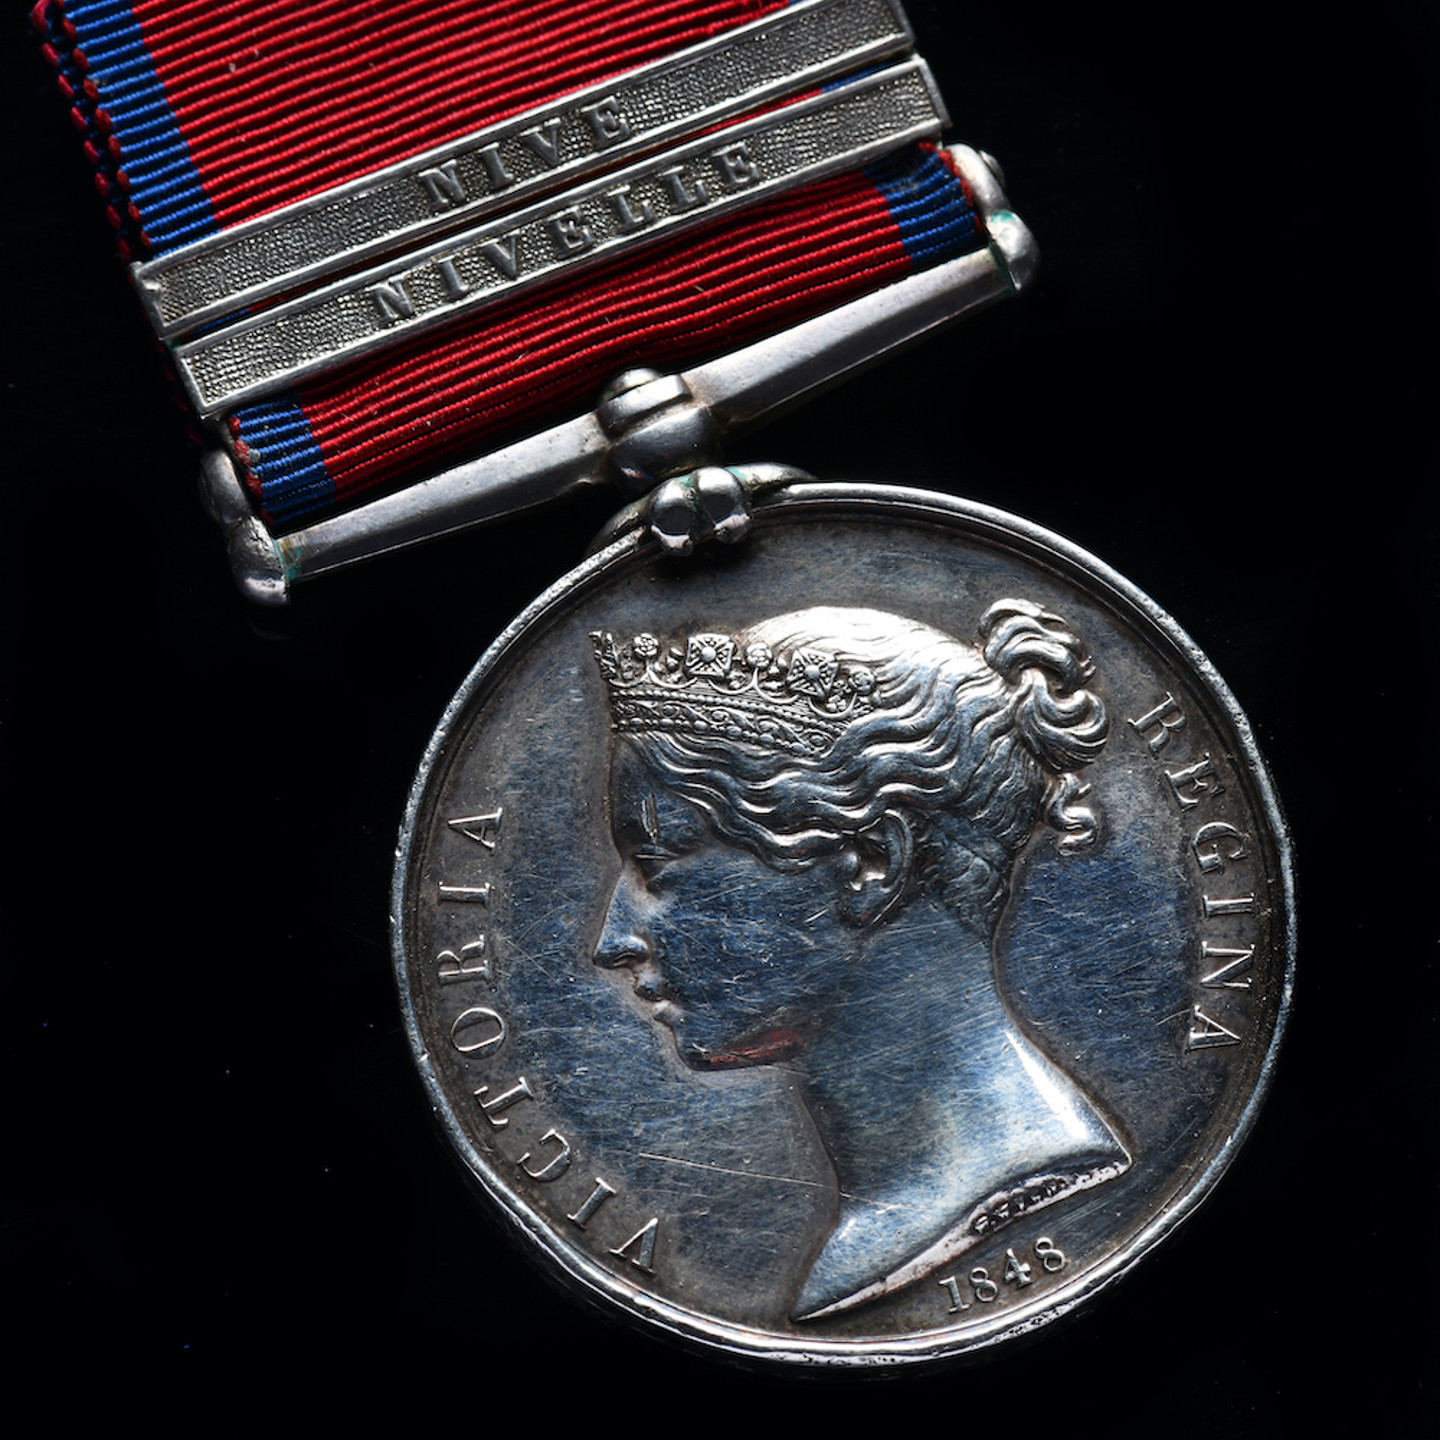 British Army Military General Service Medal With Clasps For Nivelle And Nive Sold £790